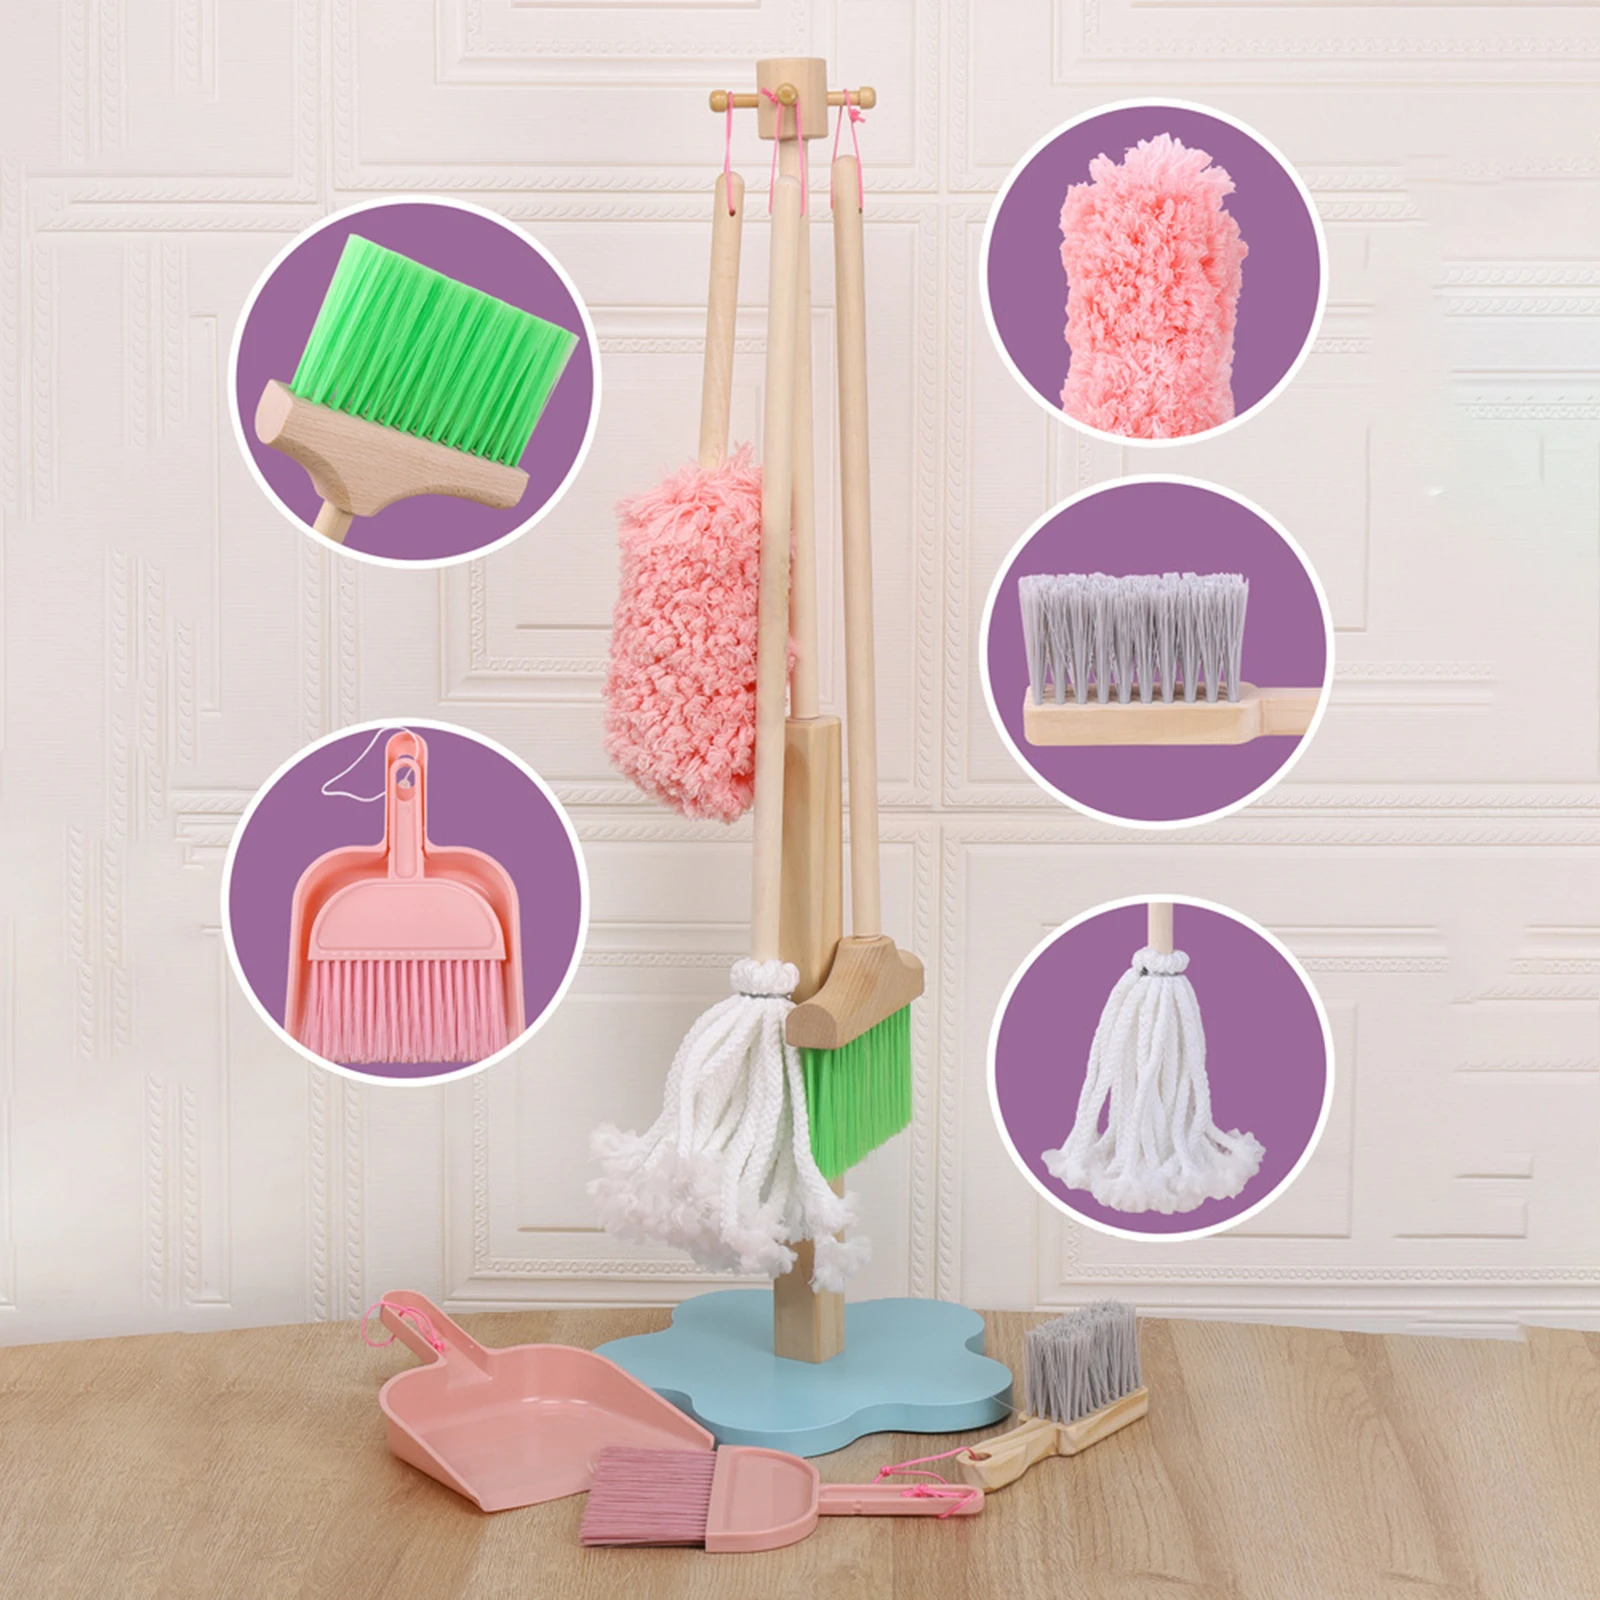 Children Cleaning Tools 6 Piece Includes Mop Brush Dustpan for Kids Children